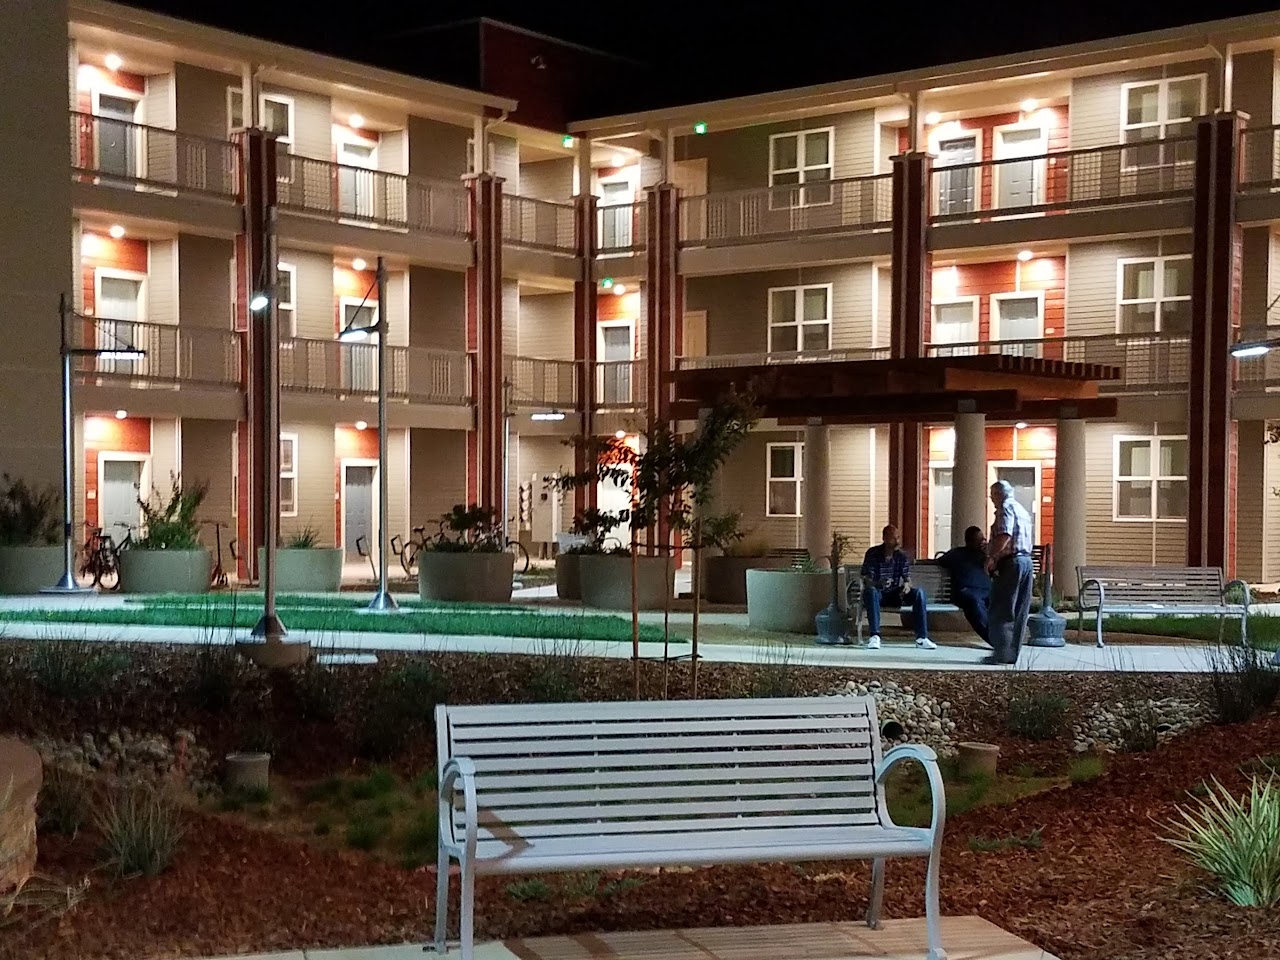 Photo of MATHER VETERANS VILLAGE. Affordable housing located at 3615 BLECKELY STREET RANCHO CORDOVA, CA 95655